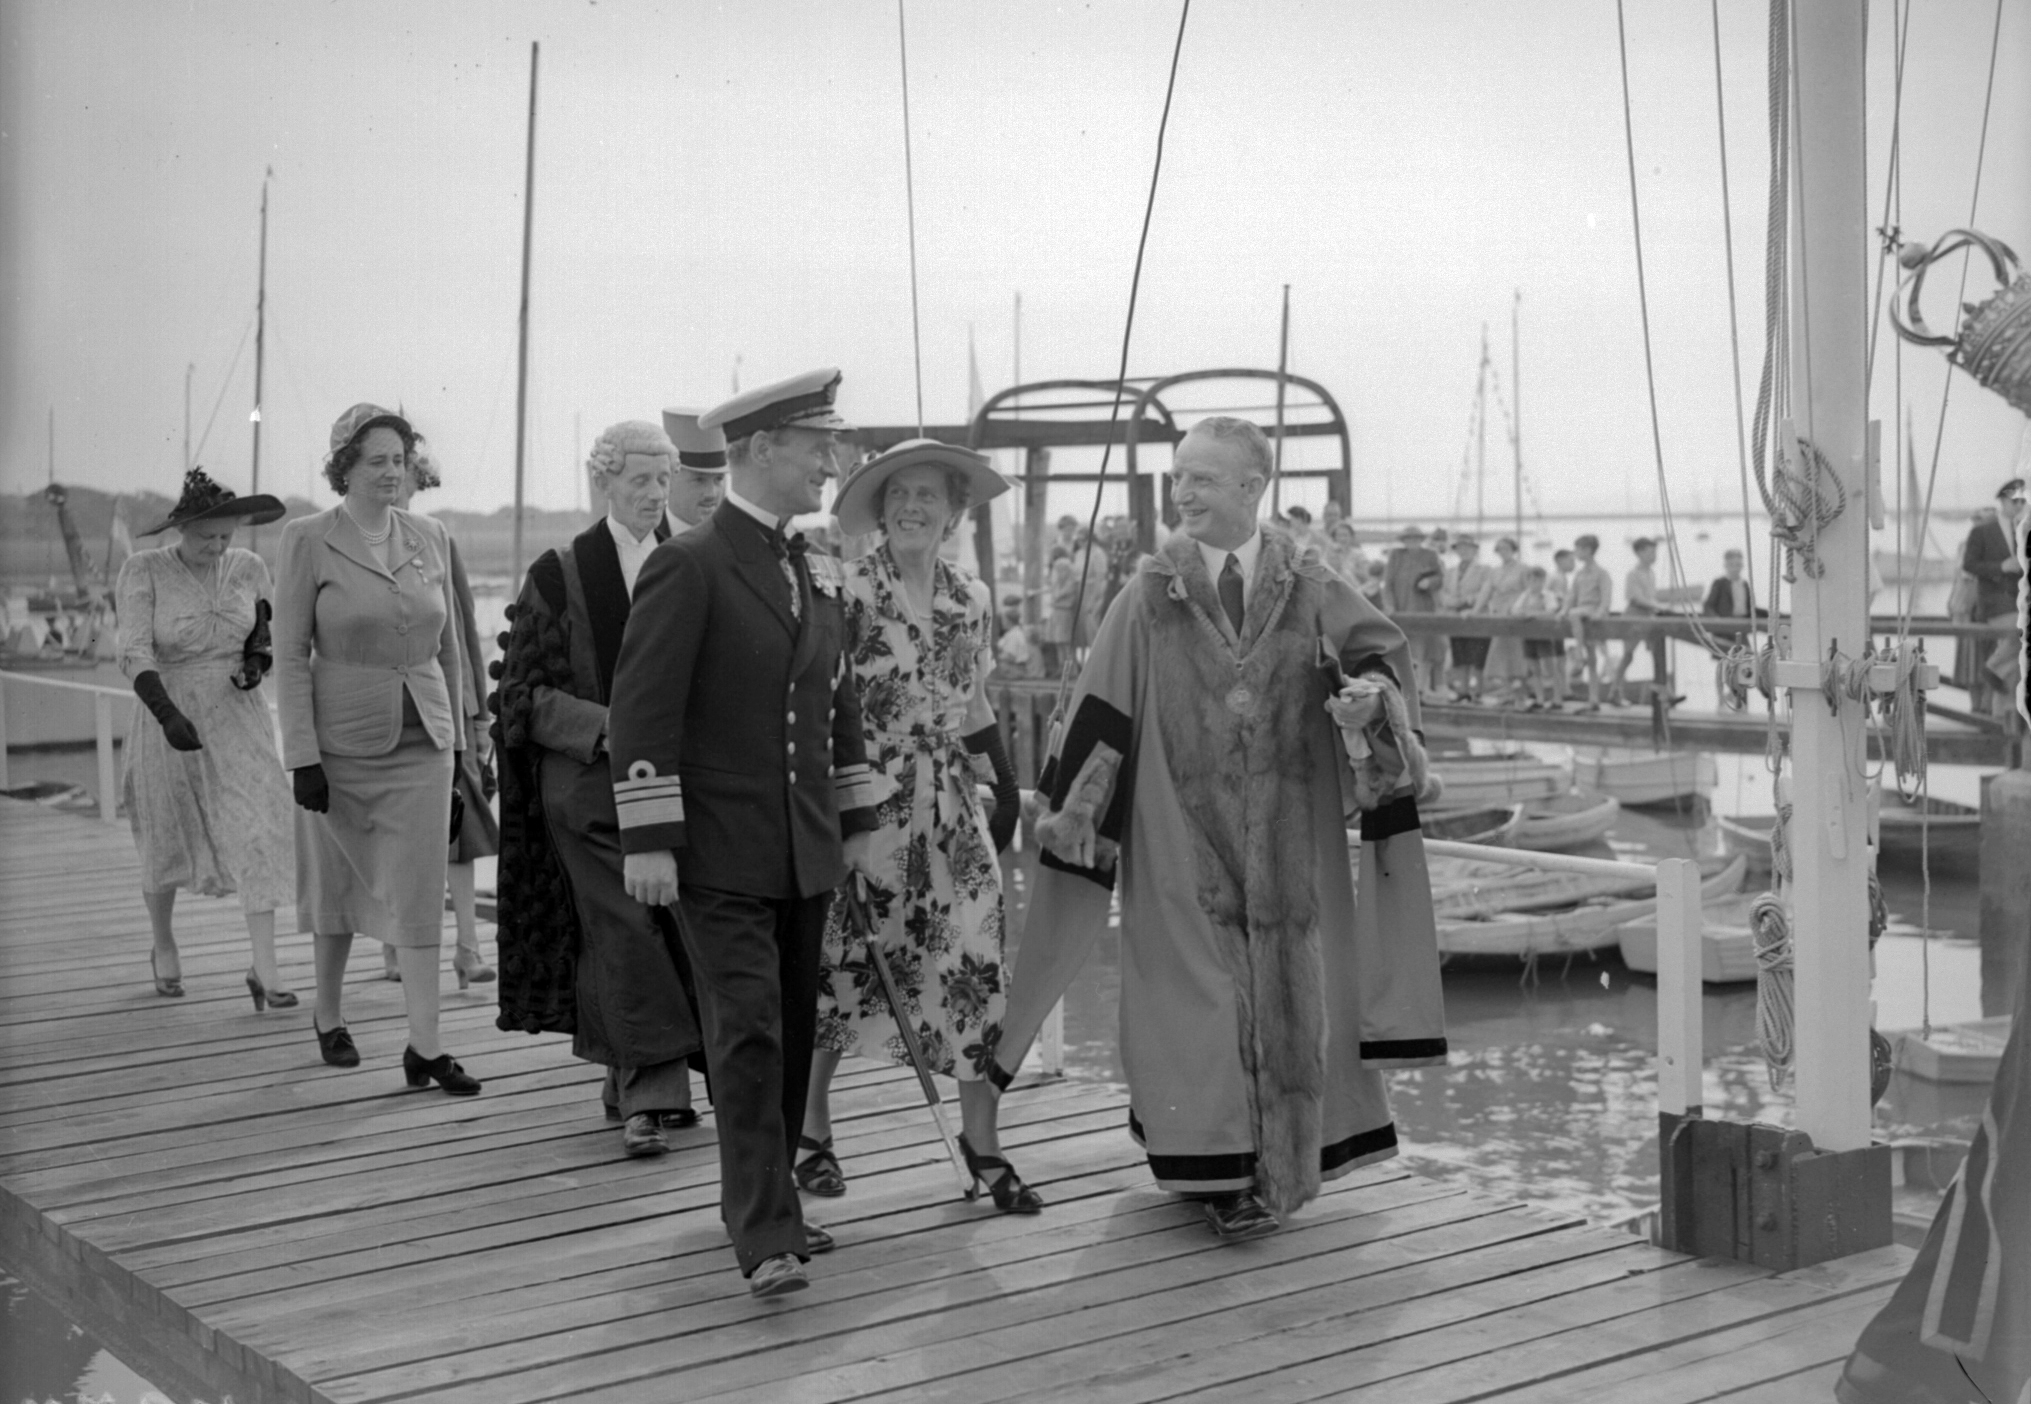 Lymington centenary celebrations. 7th August 1950. THE SOUTHERN DAILY ECHO ARCHIVES. Ref - 7877